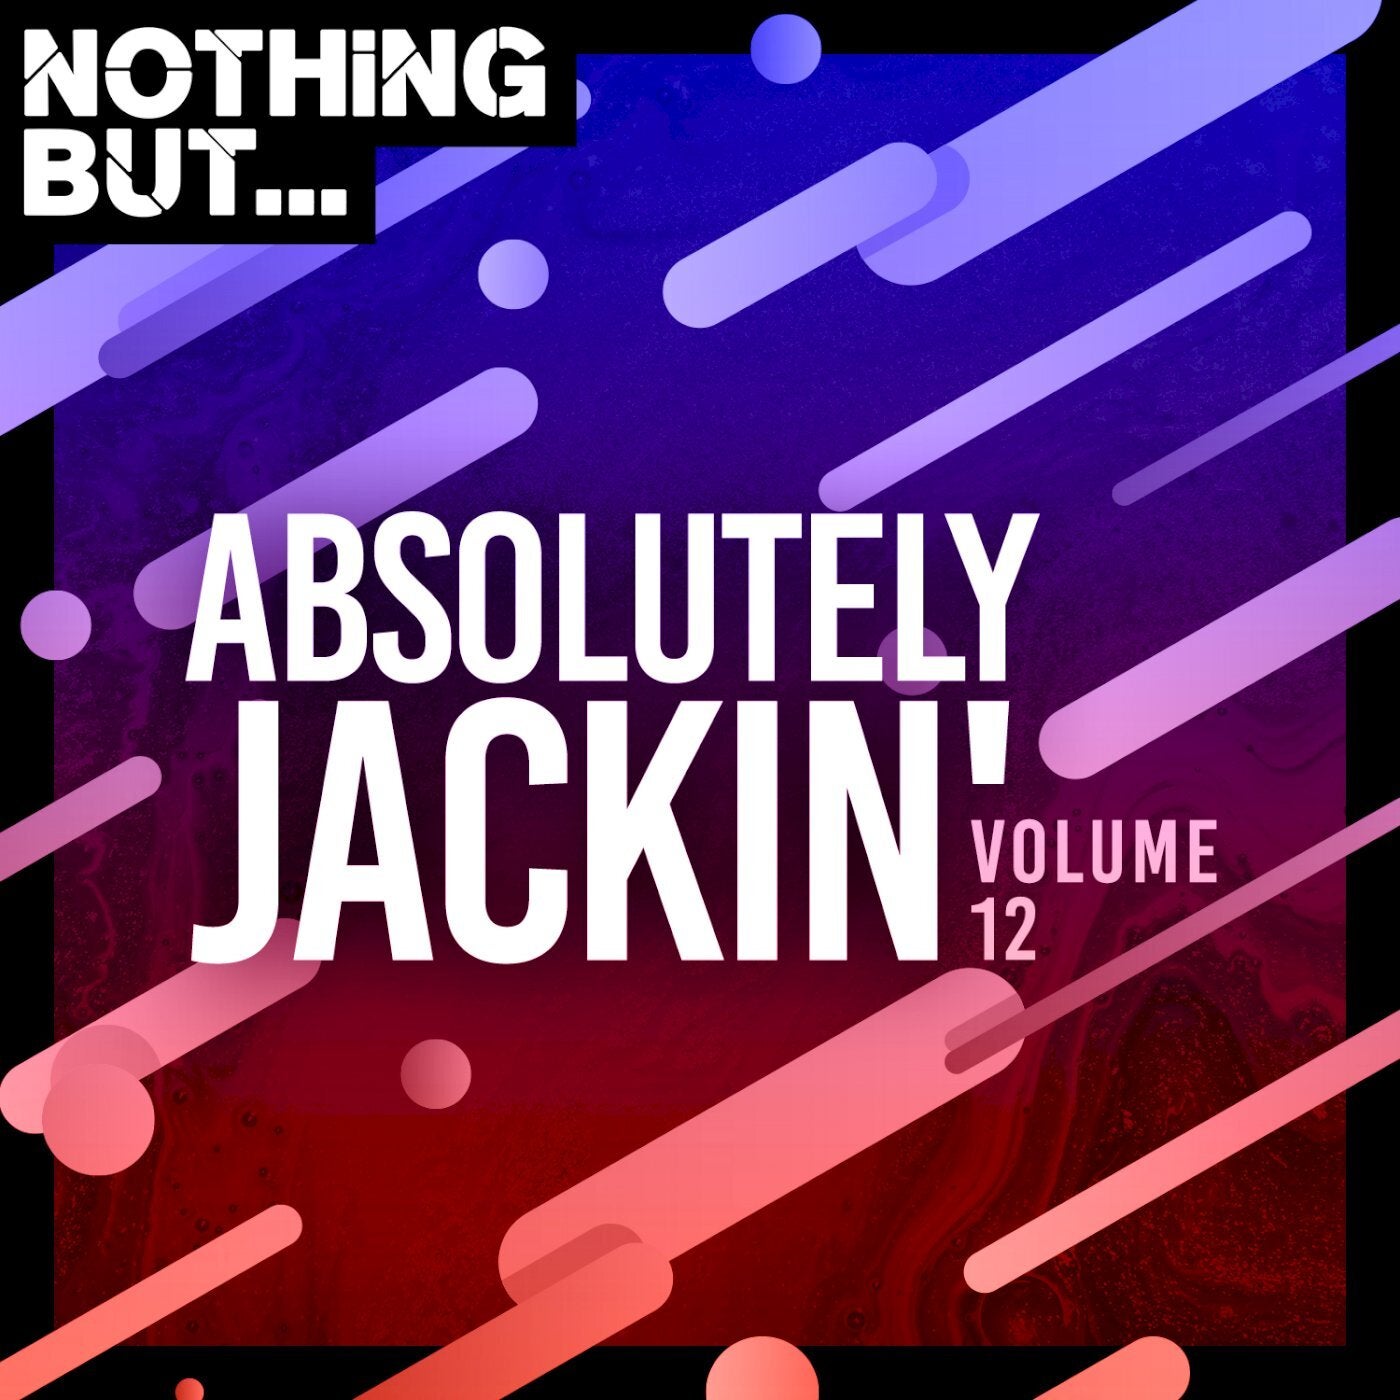 Nothing But... Absolutely Jackin', Vol. 12